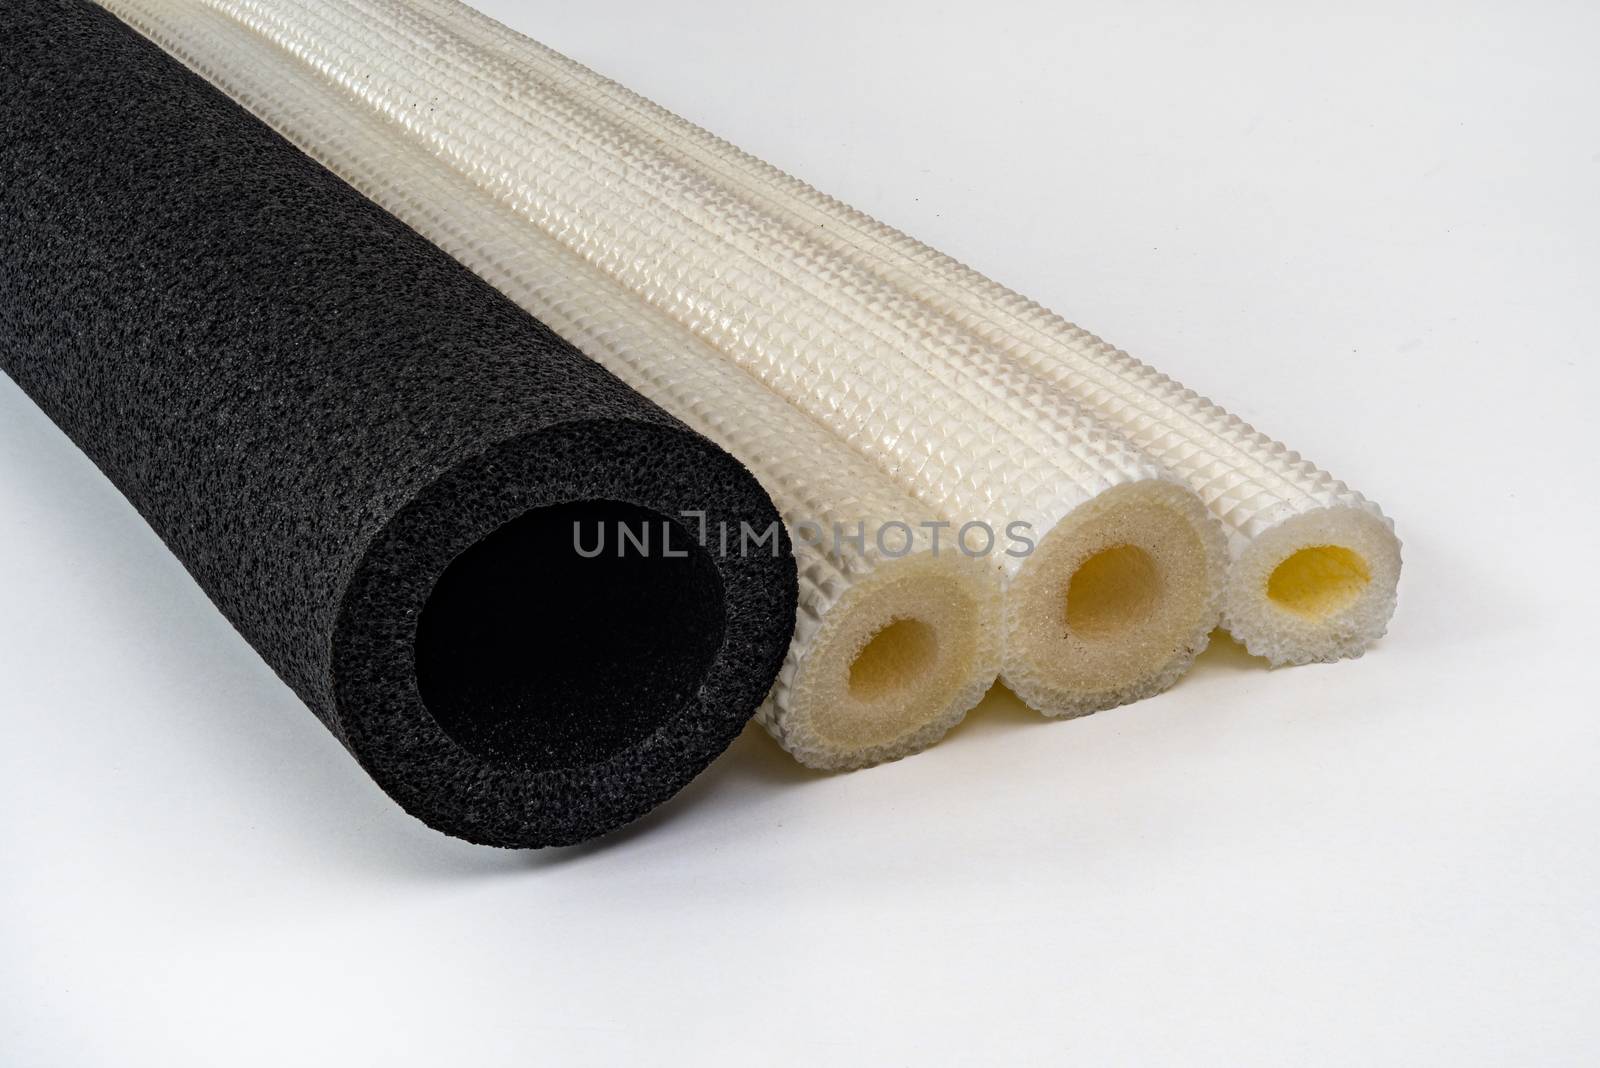 Polyethylene pipe insulation different diameter and colors shockproof foam